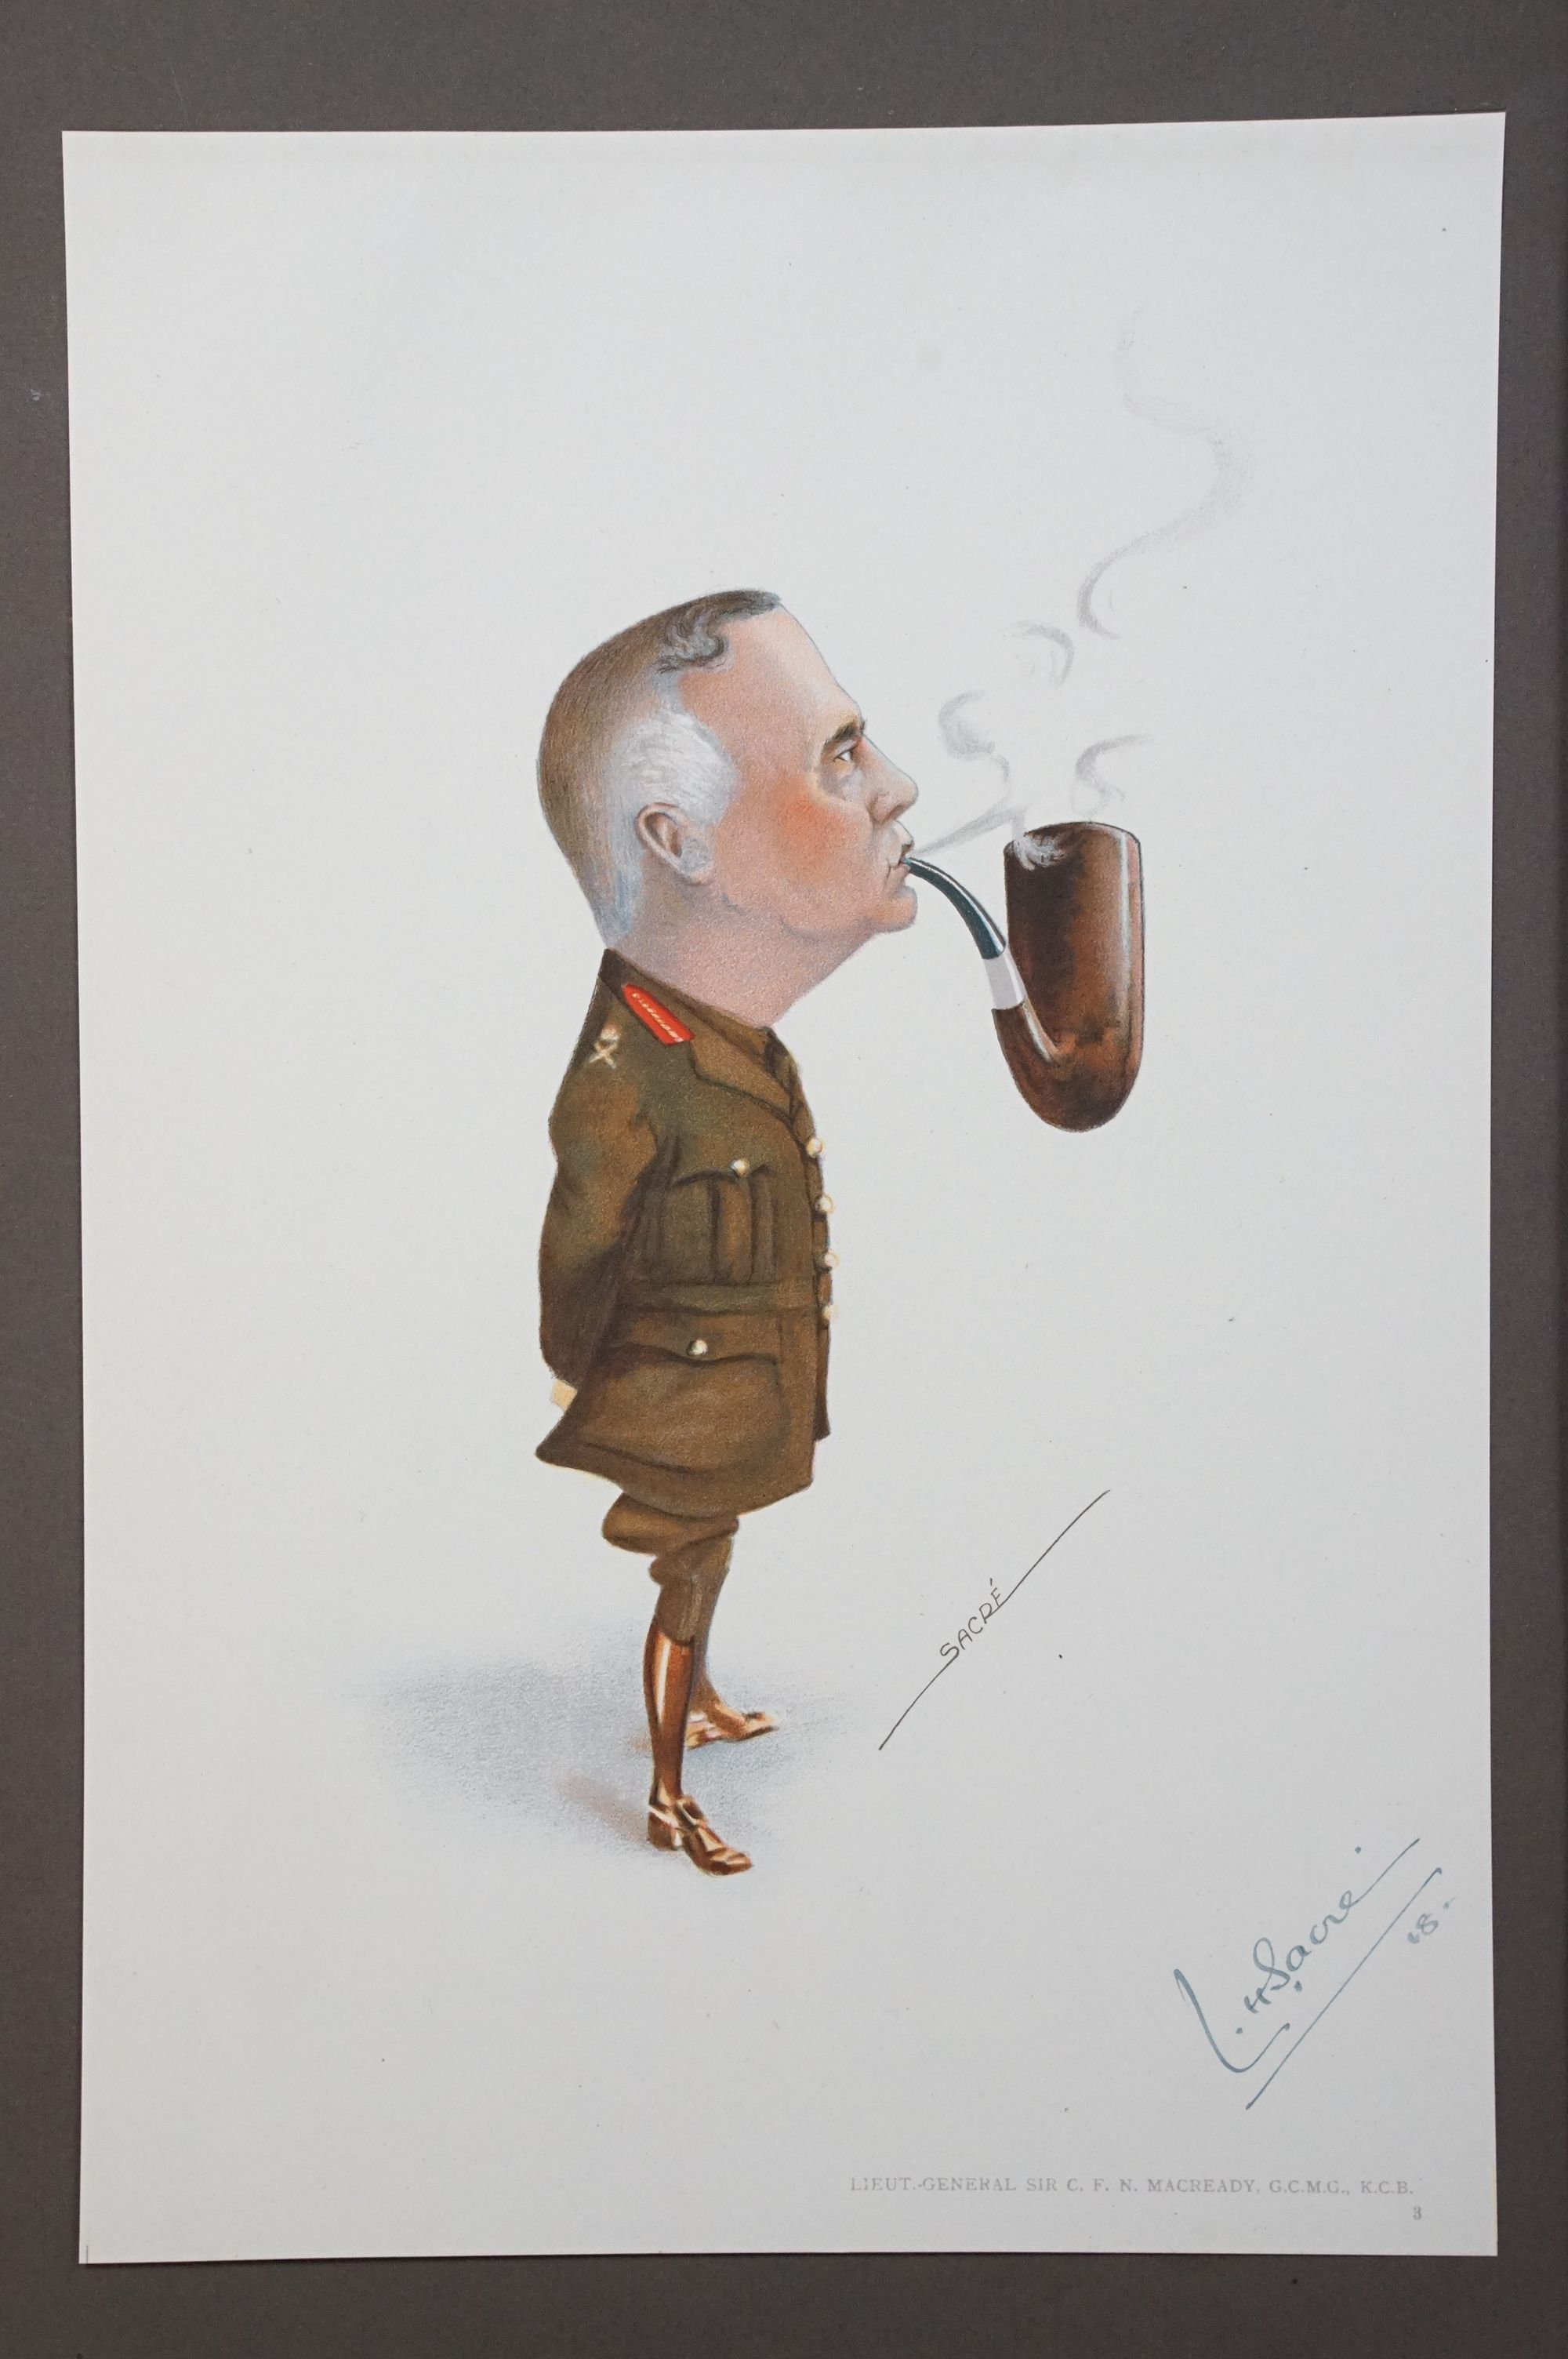 Lester Howard Sacré (1892 - 1974), Sidelights by Sacré, set of caricatures of British military - Image 2 of 7